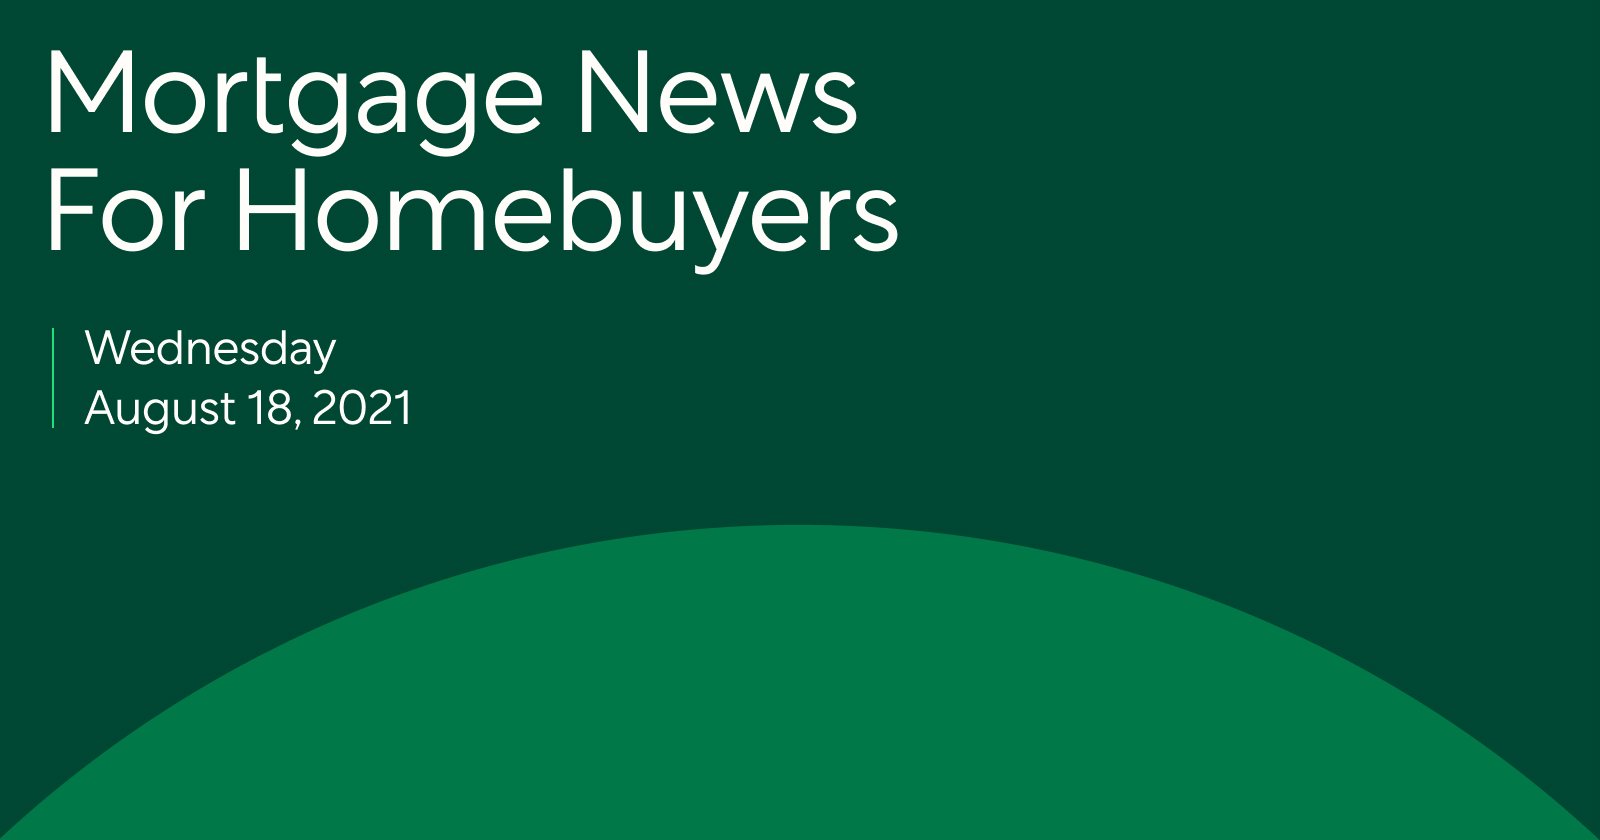 ortgage News: Are FHA Loans The Answer For First-Time Buyers?